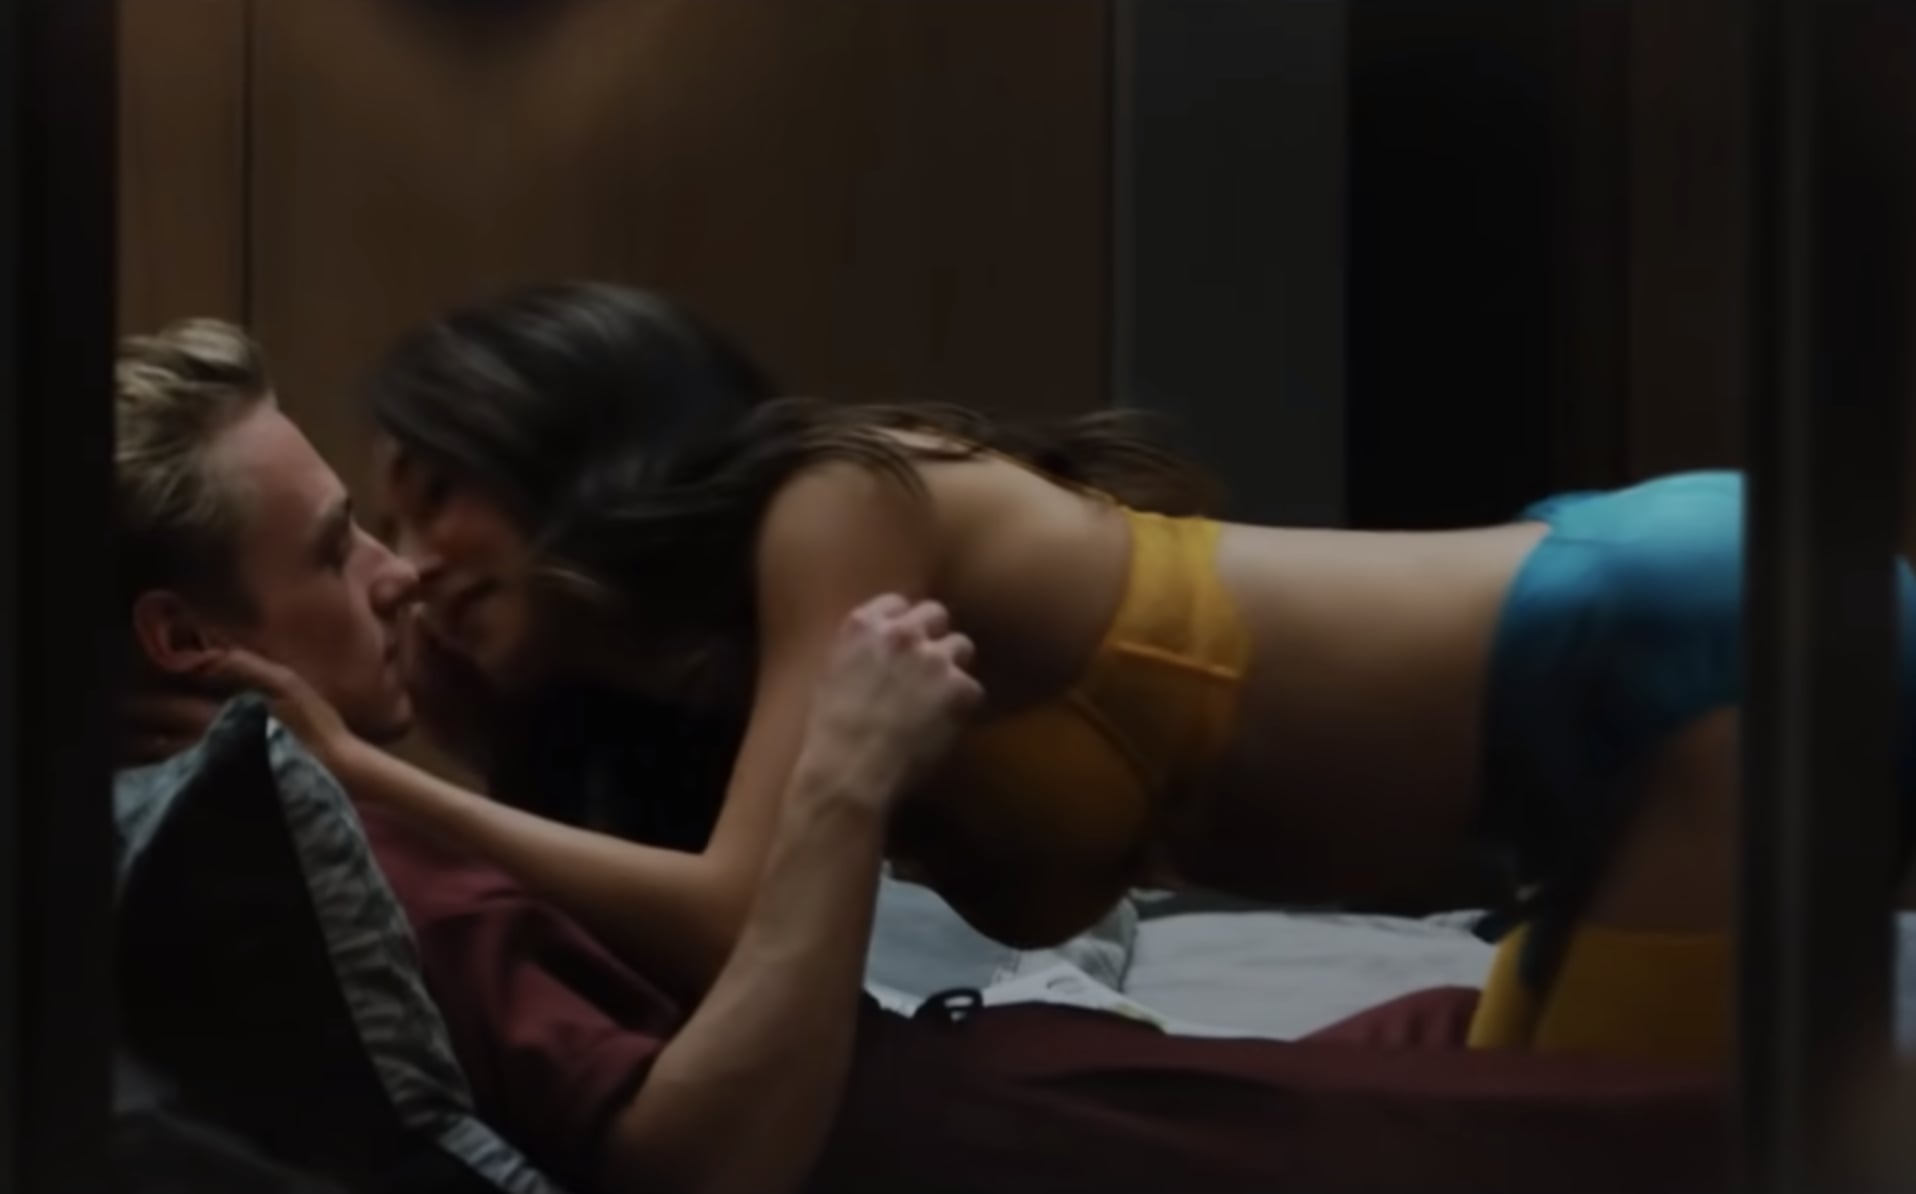 Voyeur movie with various sex scenes with different couples